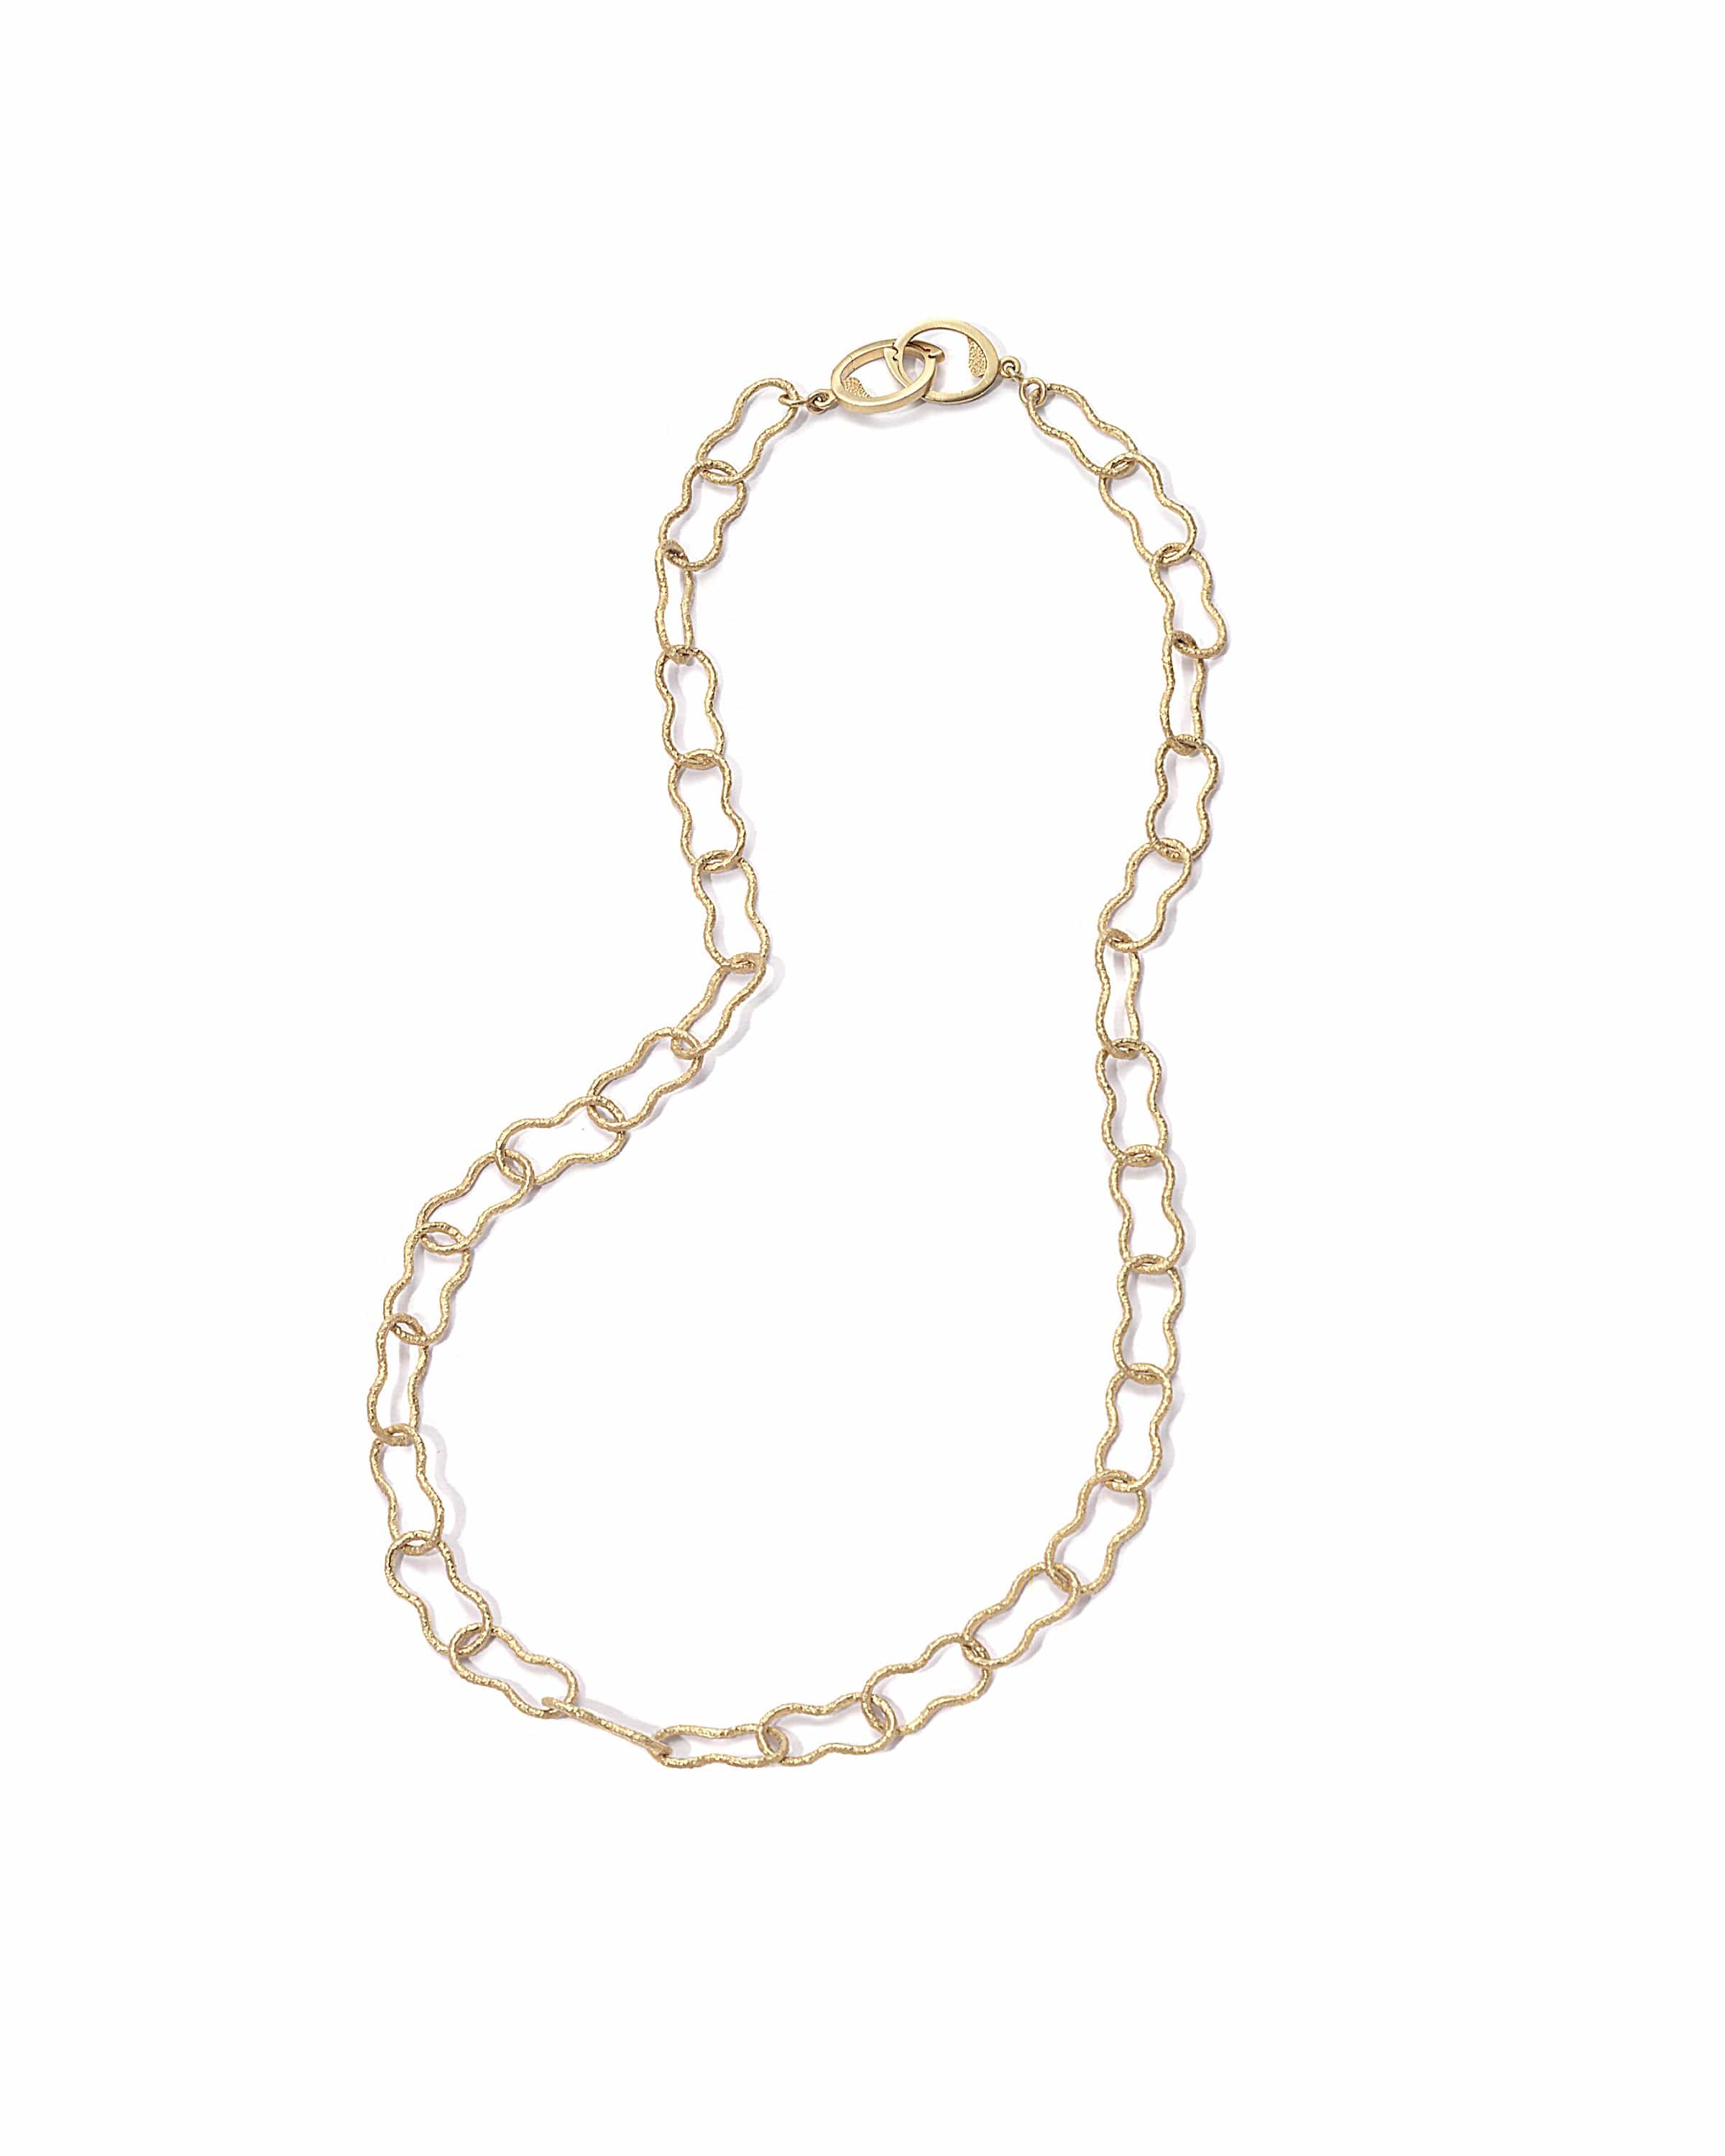 The Rubber Band Chain - Coomi